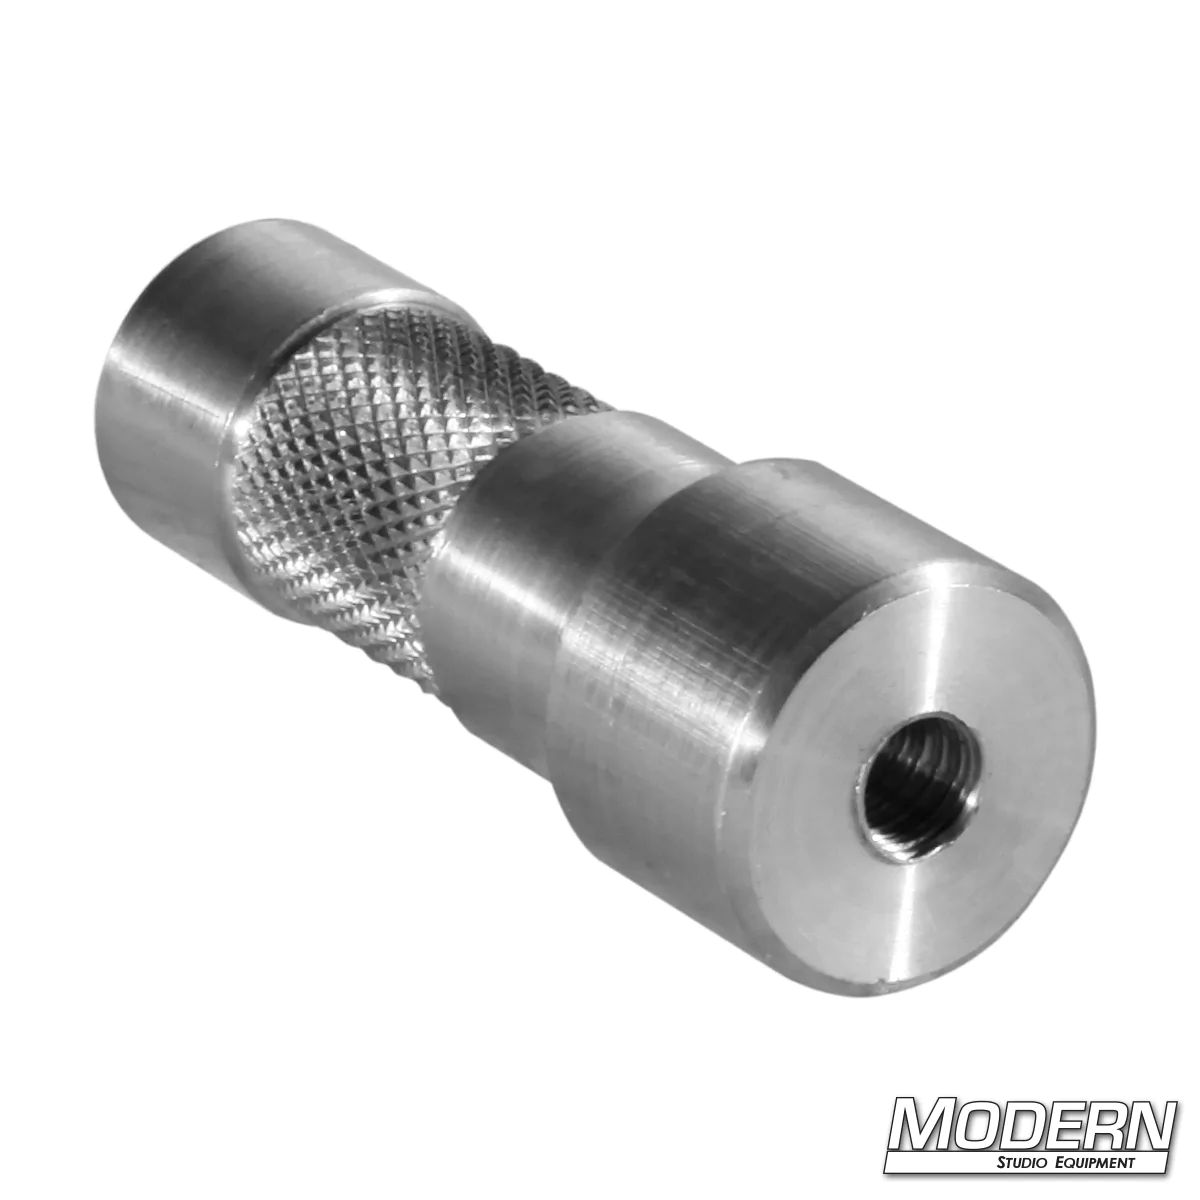 Starter Pin 1/4-inch to 1/4-inch Aluminum